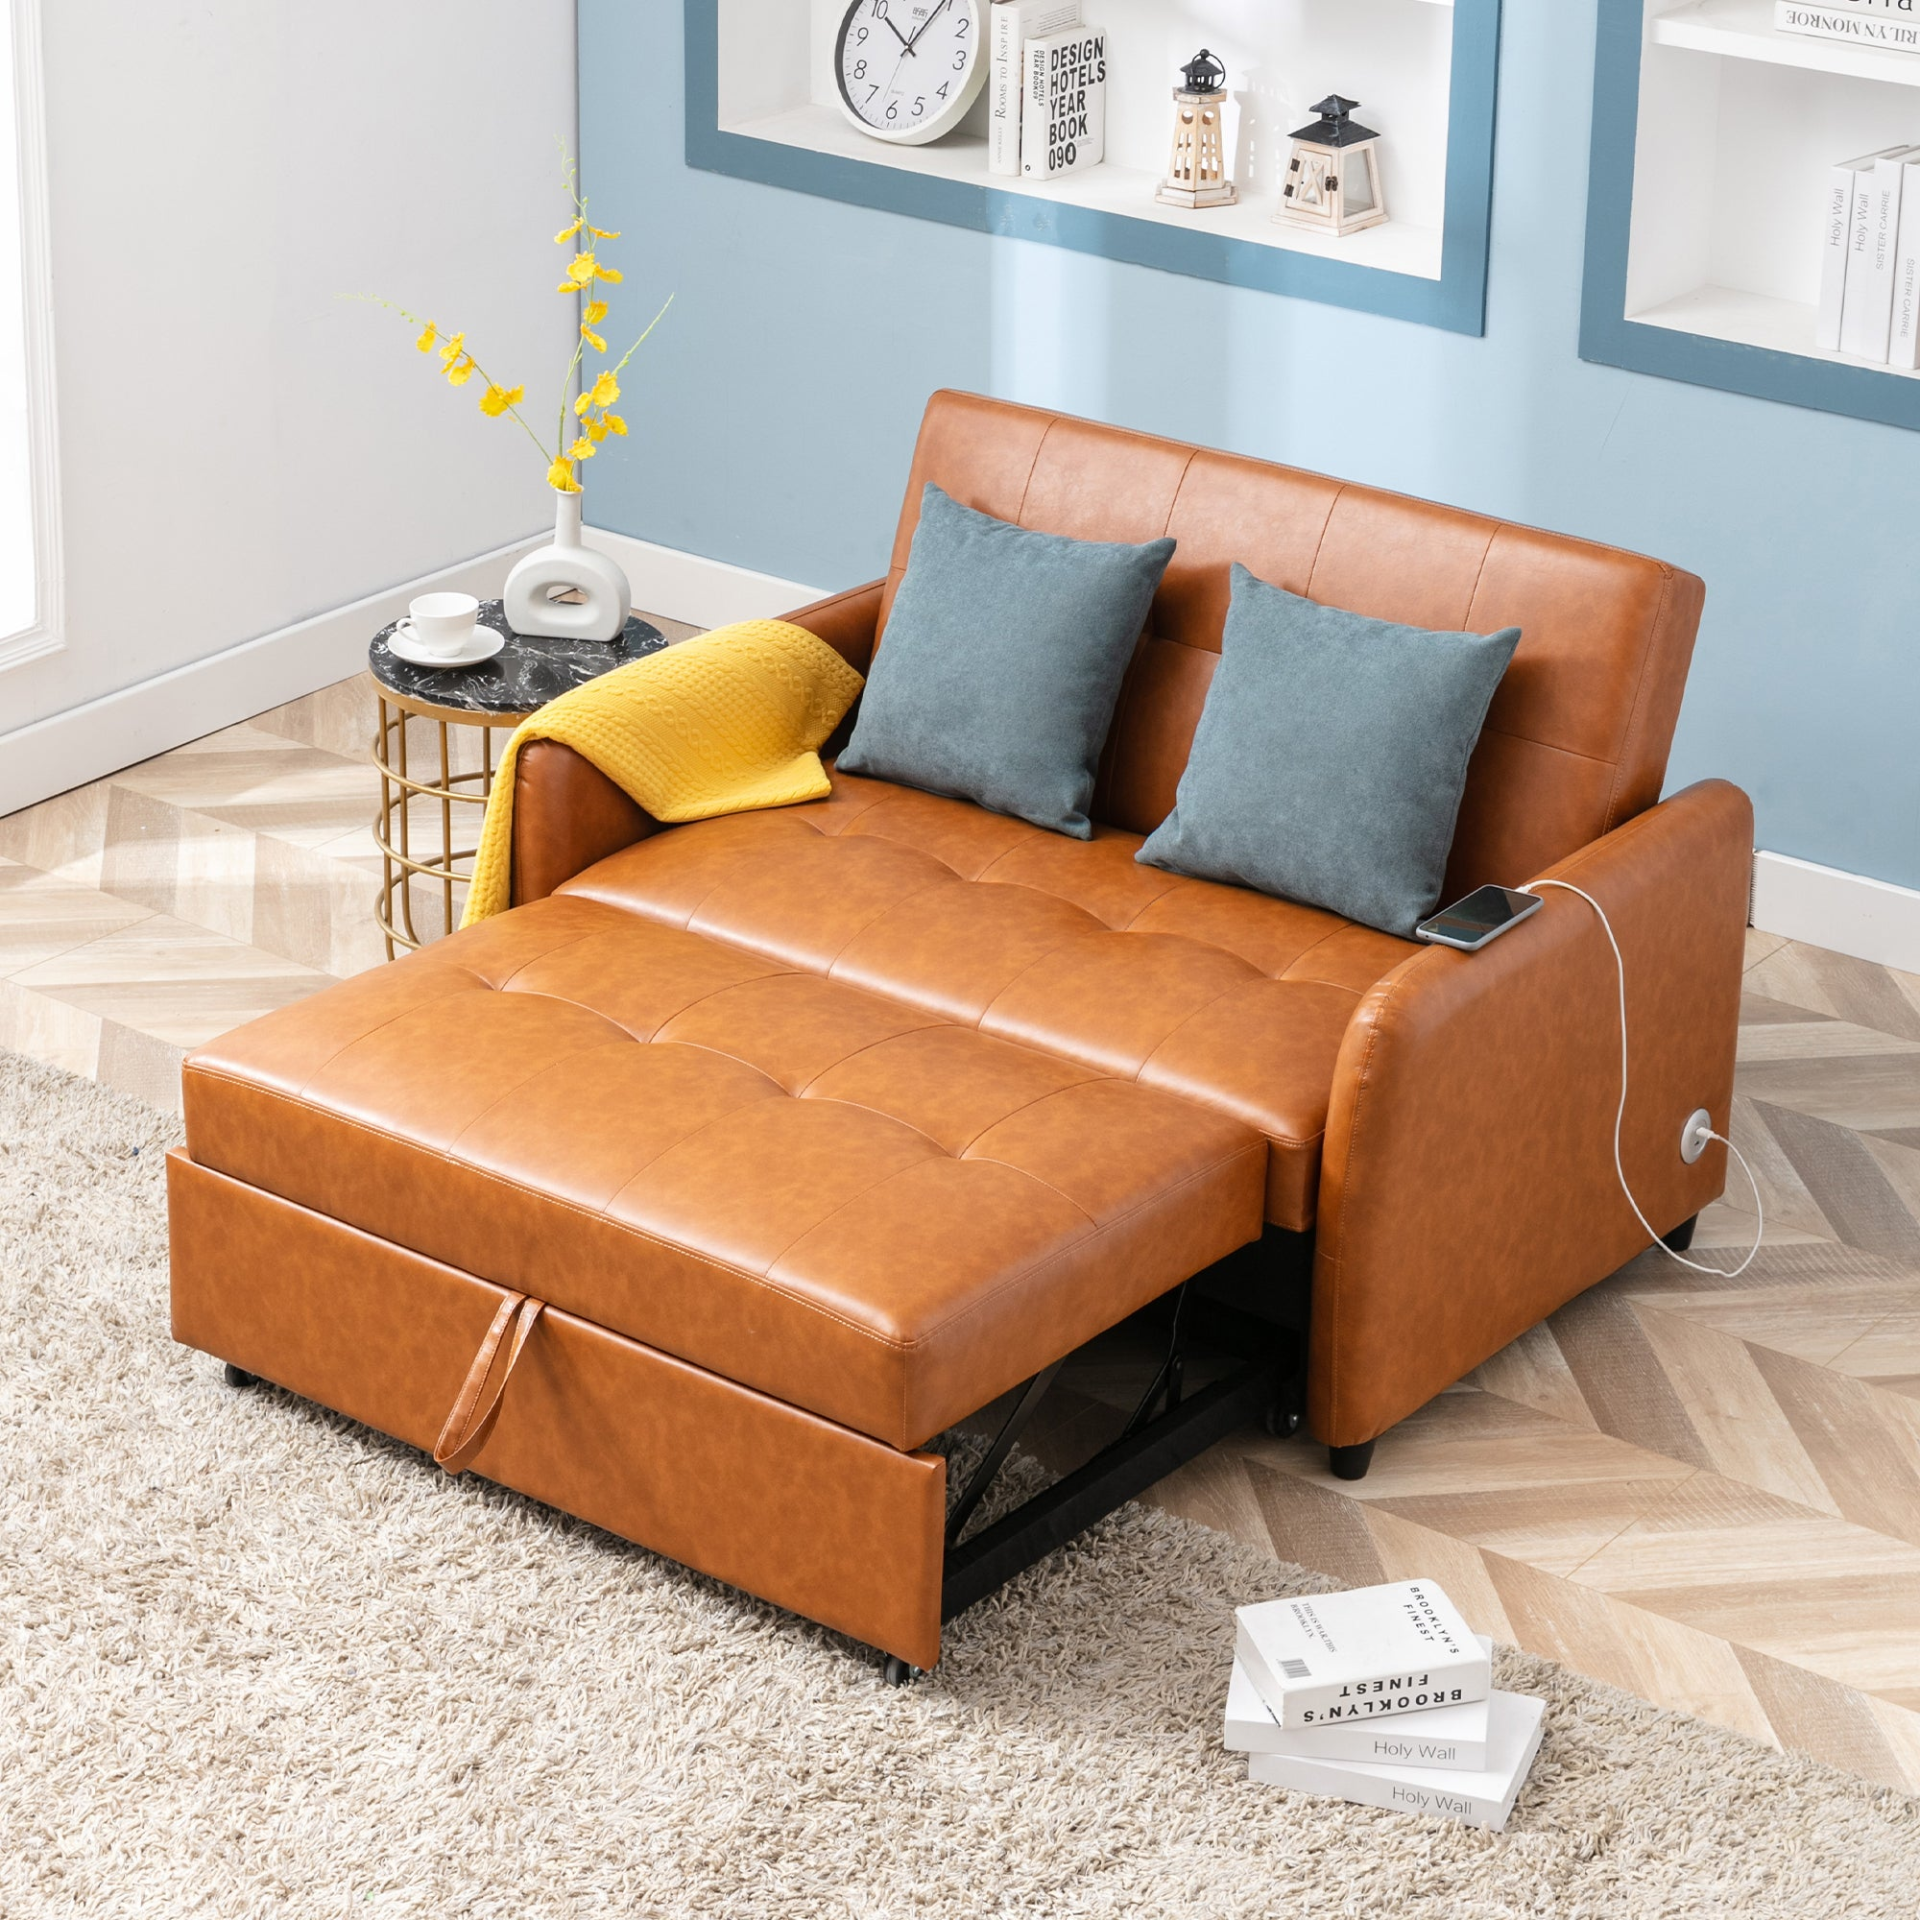 Brown - Smart Rest Convertible Armchair Sofa Bed With Dual USB Ports (51.5")